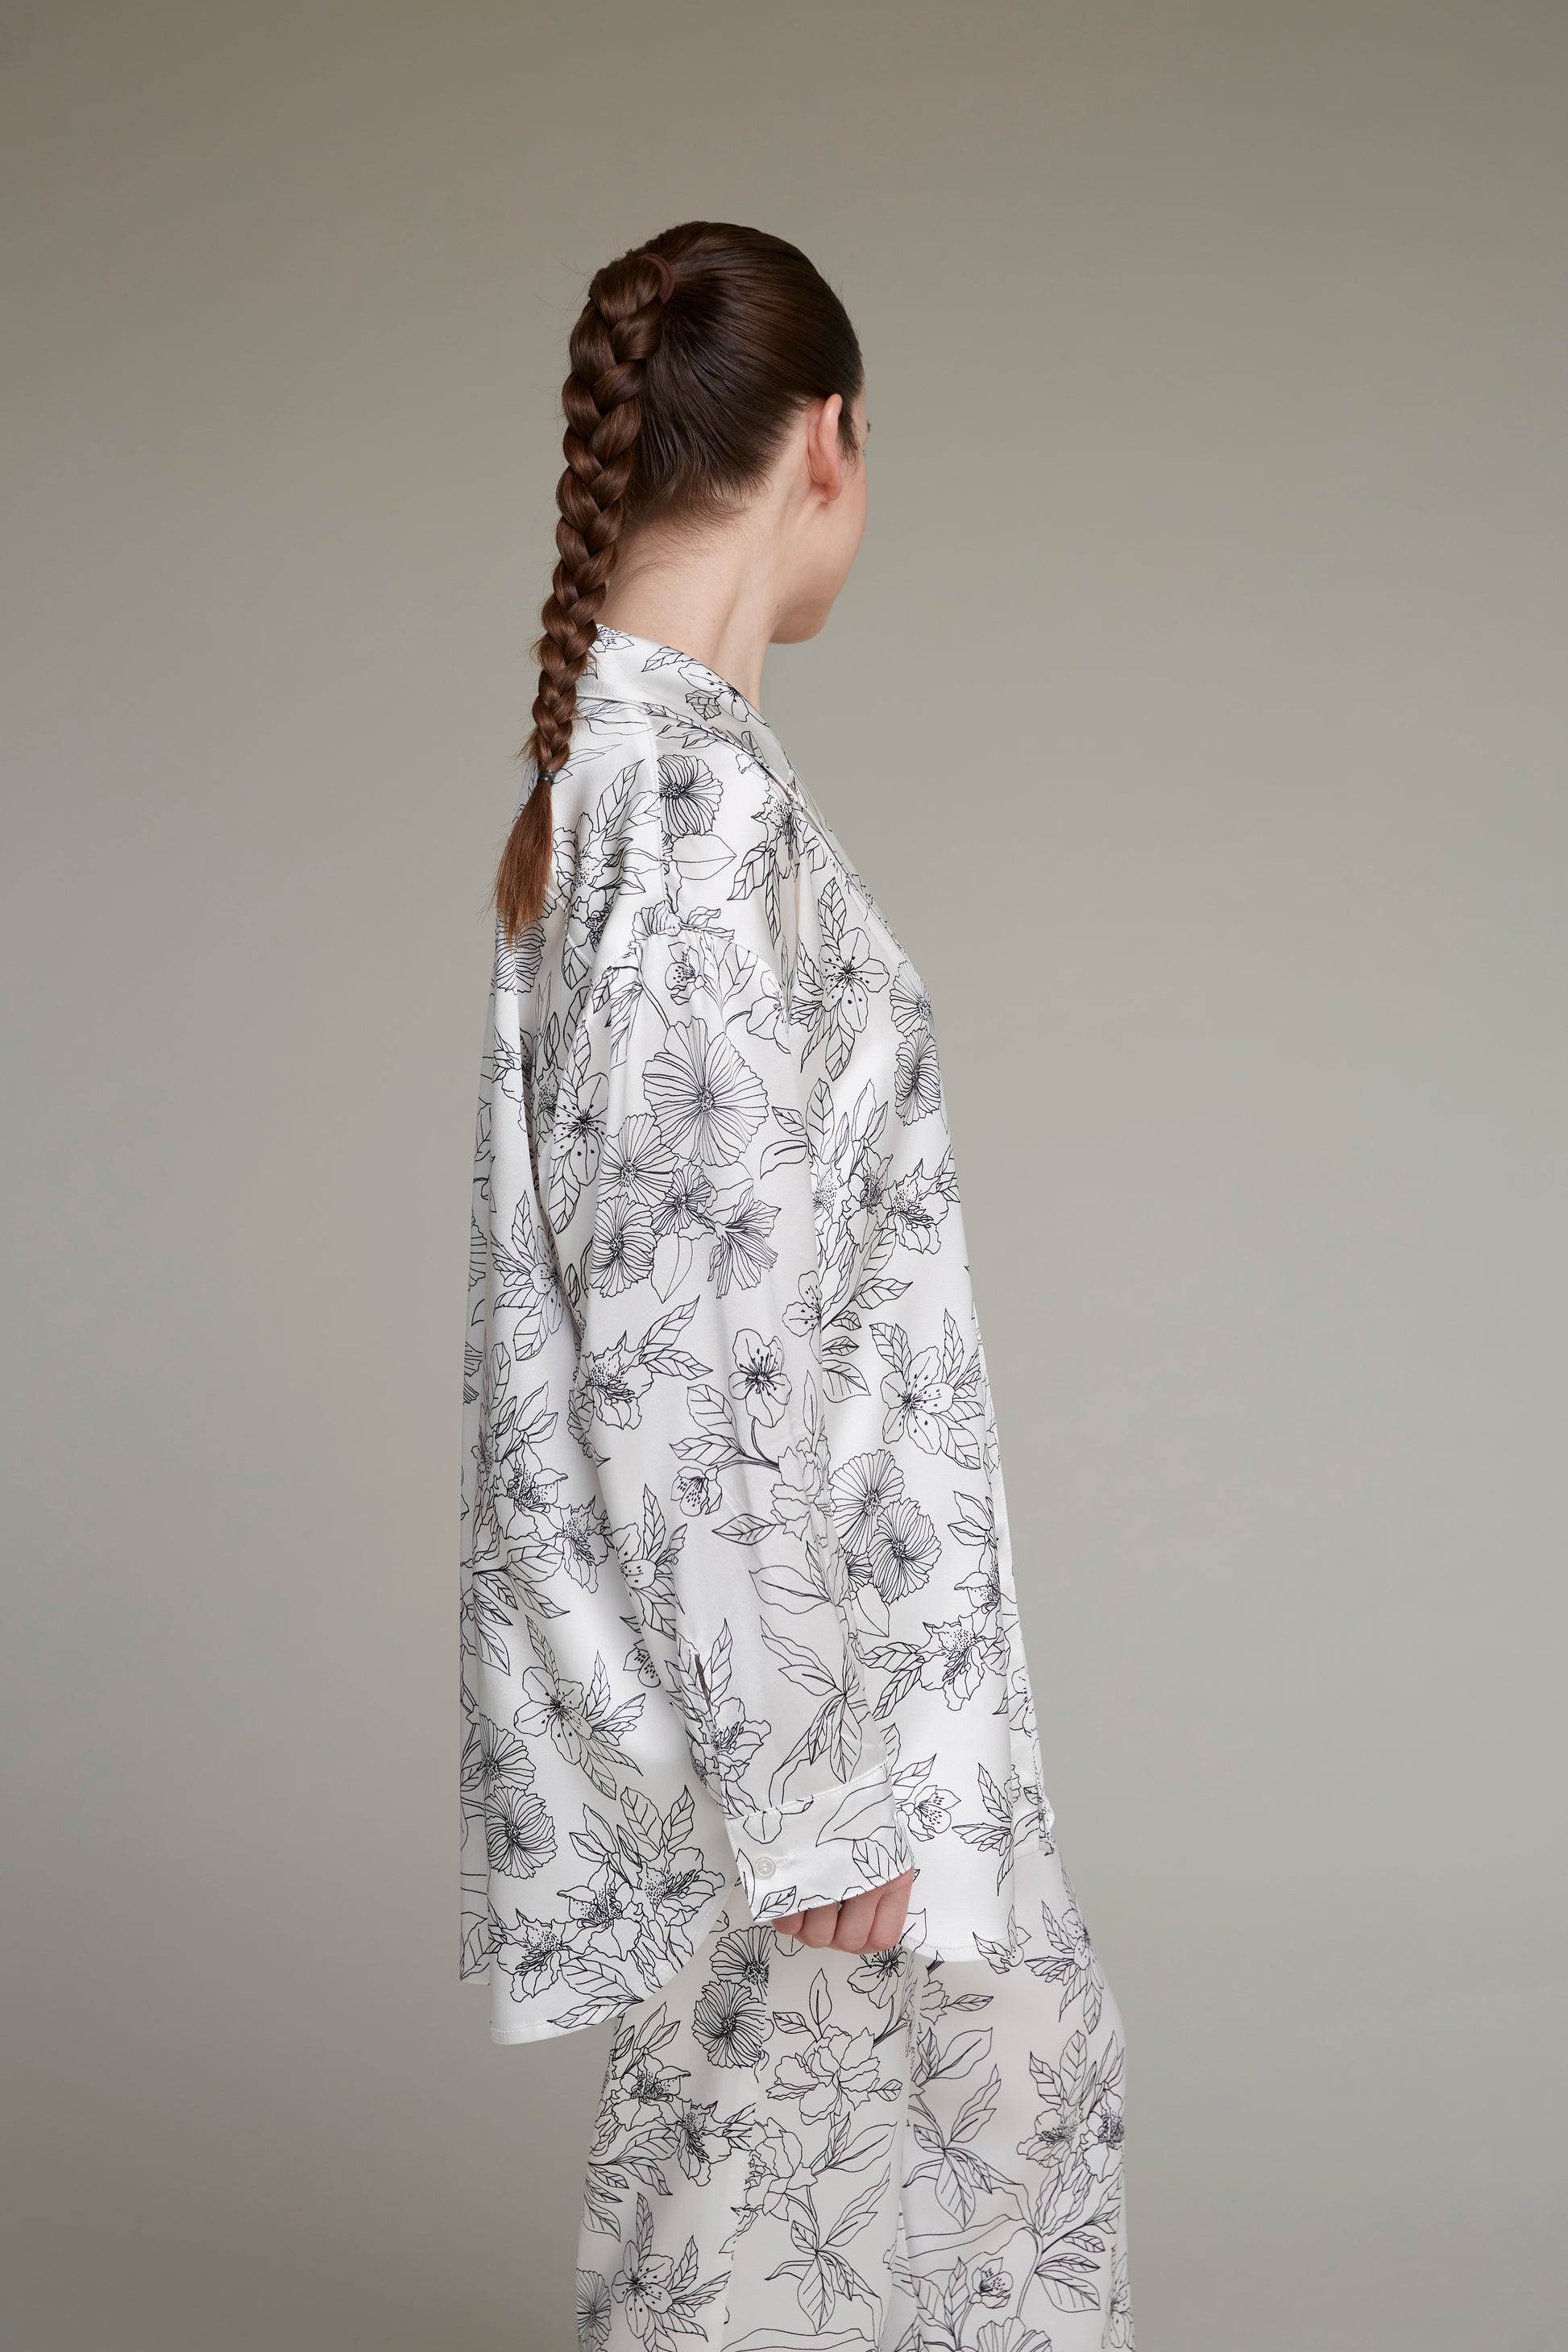 A woman with a long braid wearing a white floral-print loungewear pajama set consisting of a blouse and pants, facing away against a neutral background.